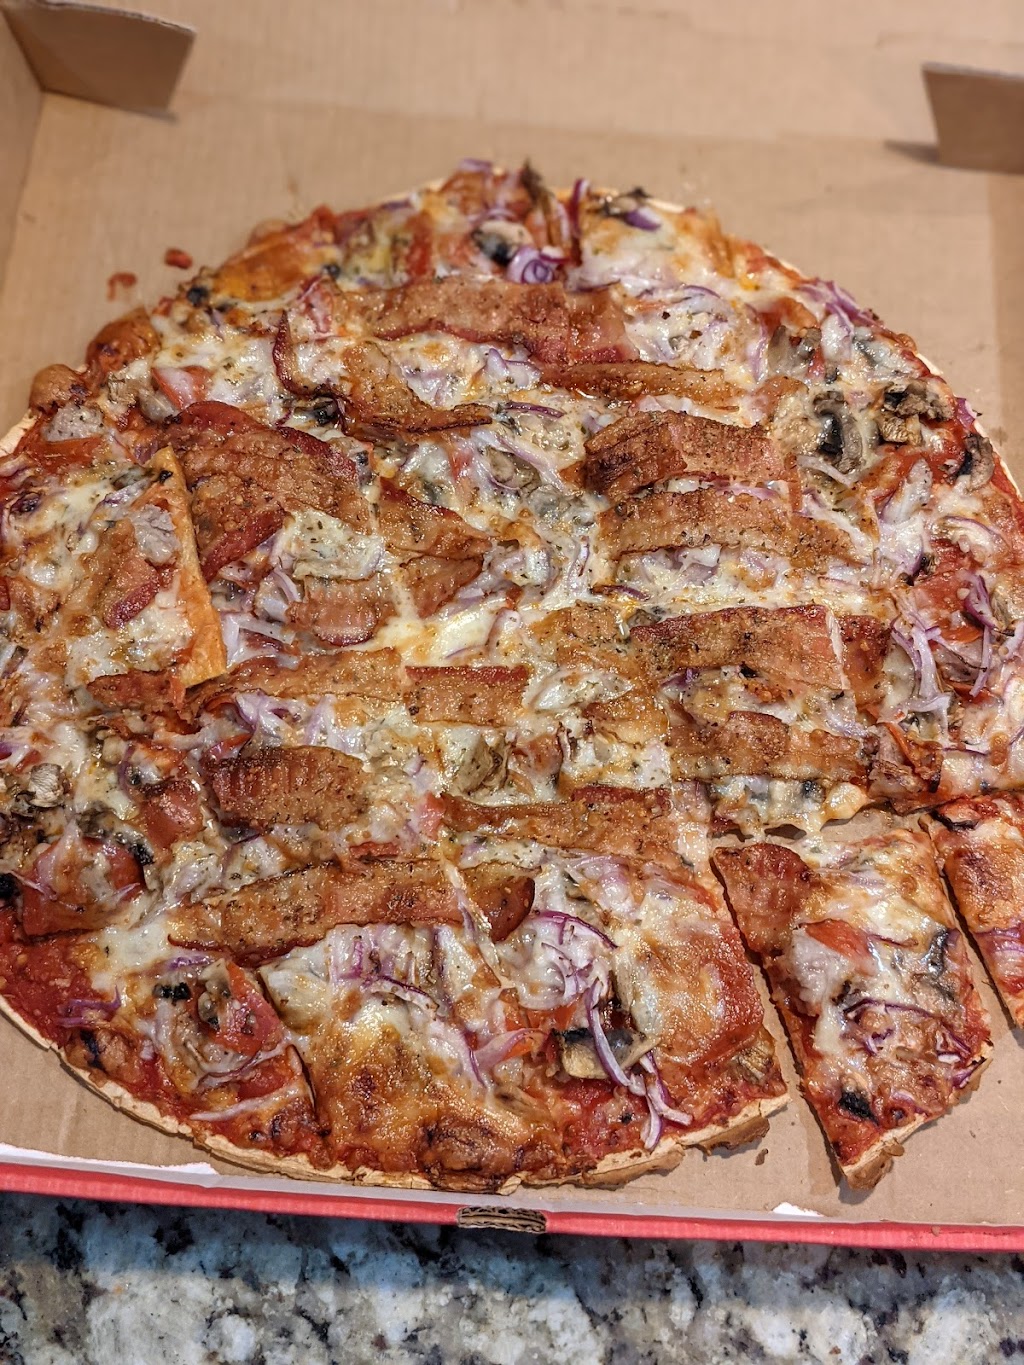 Imos Pizza | 13015 Tesson Ferry Rd, St. Louis, MO 63128 | Phone: (314) 842-3868